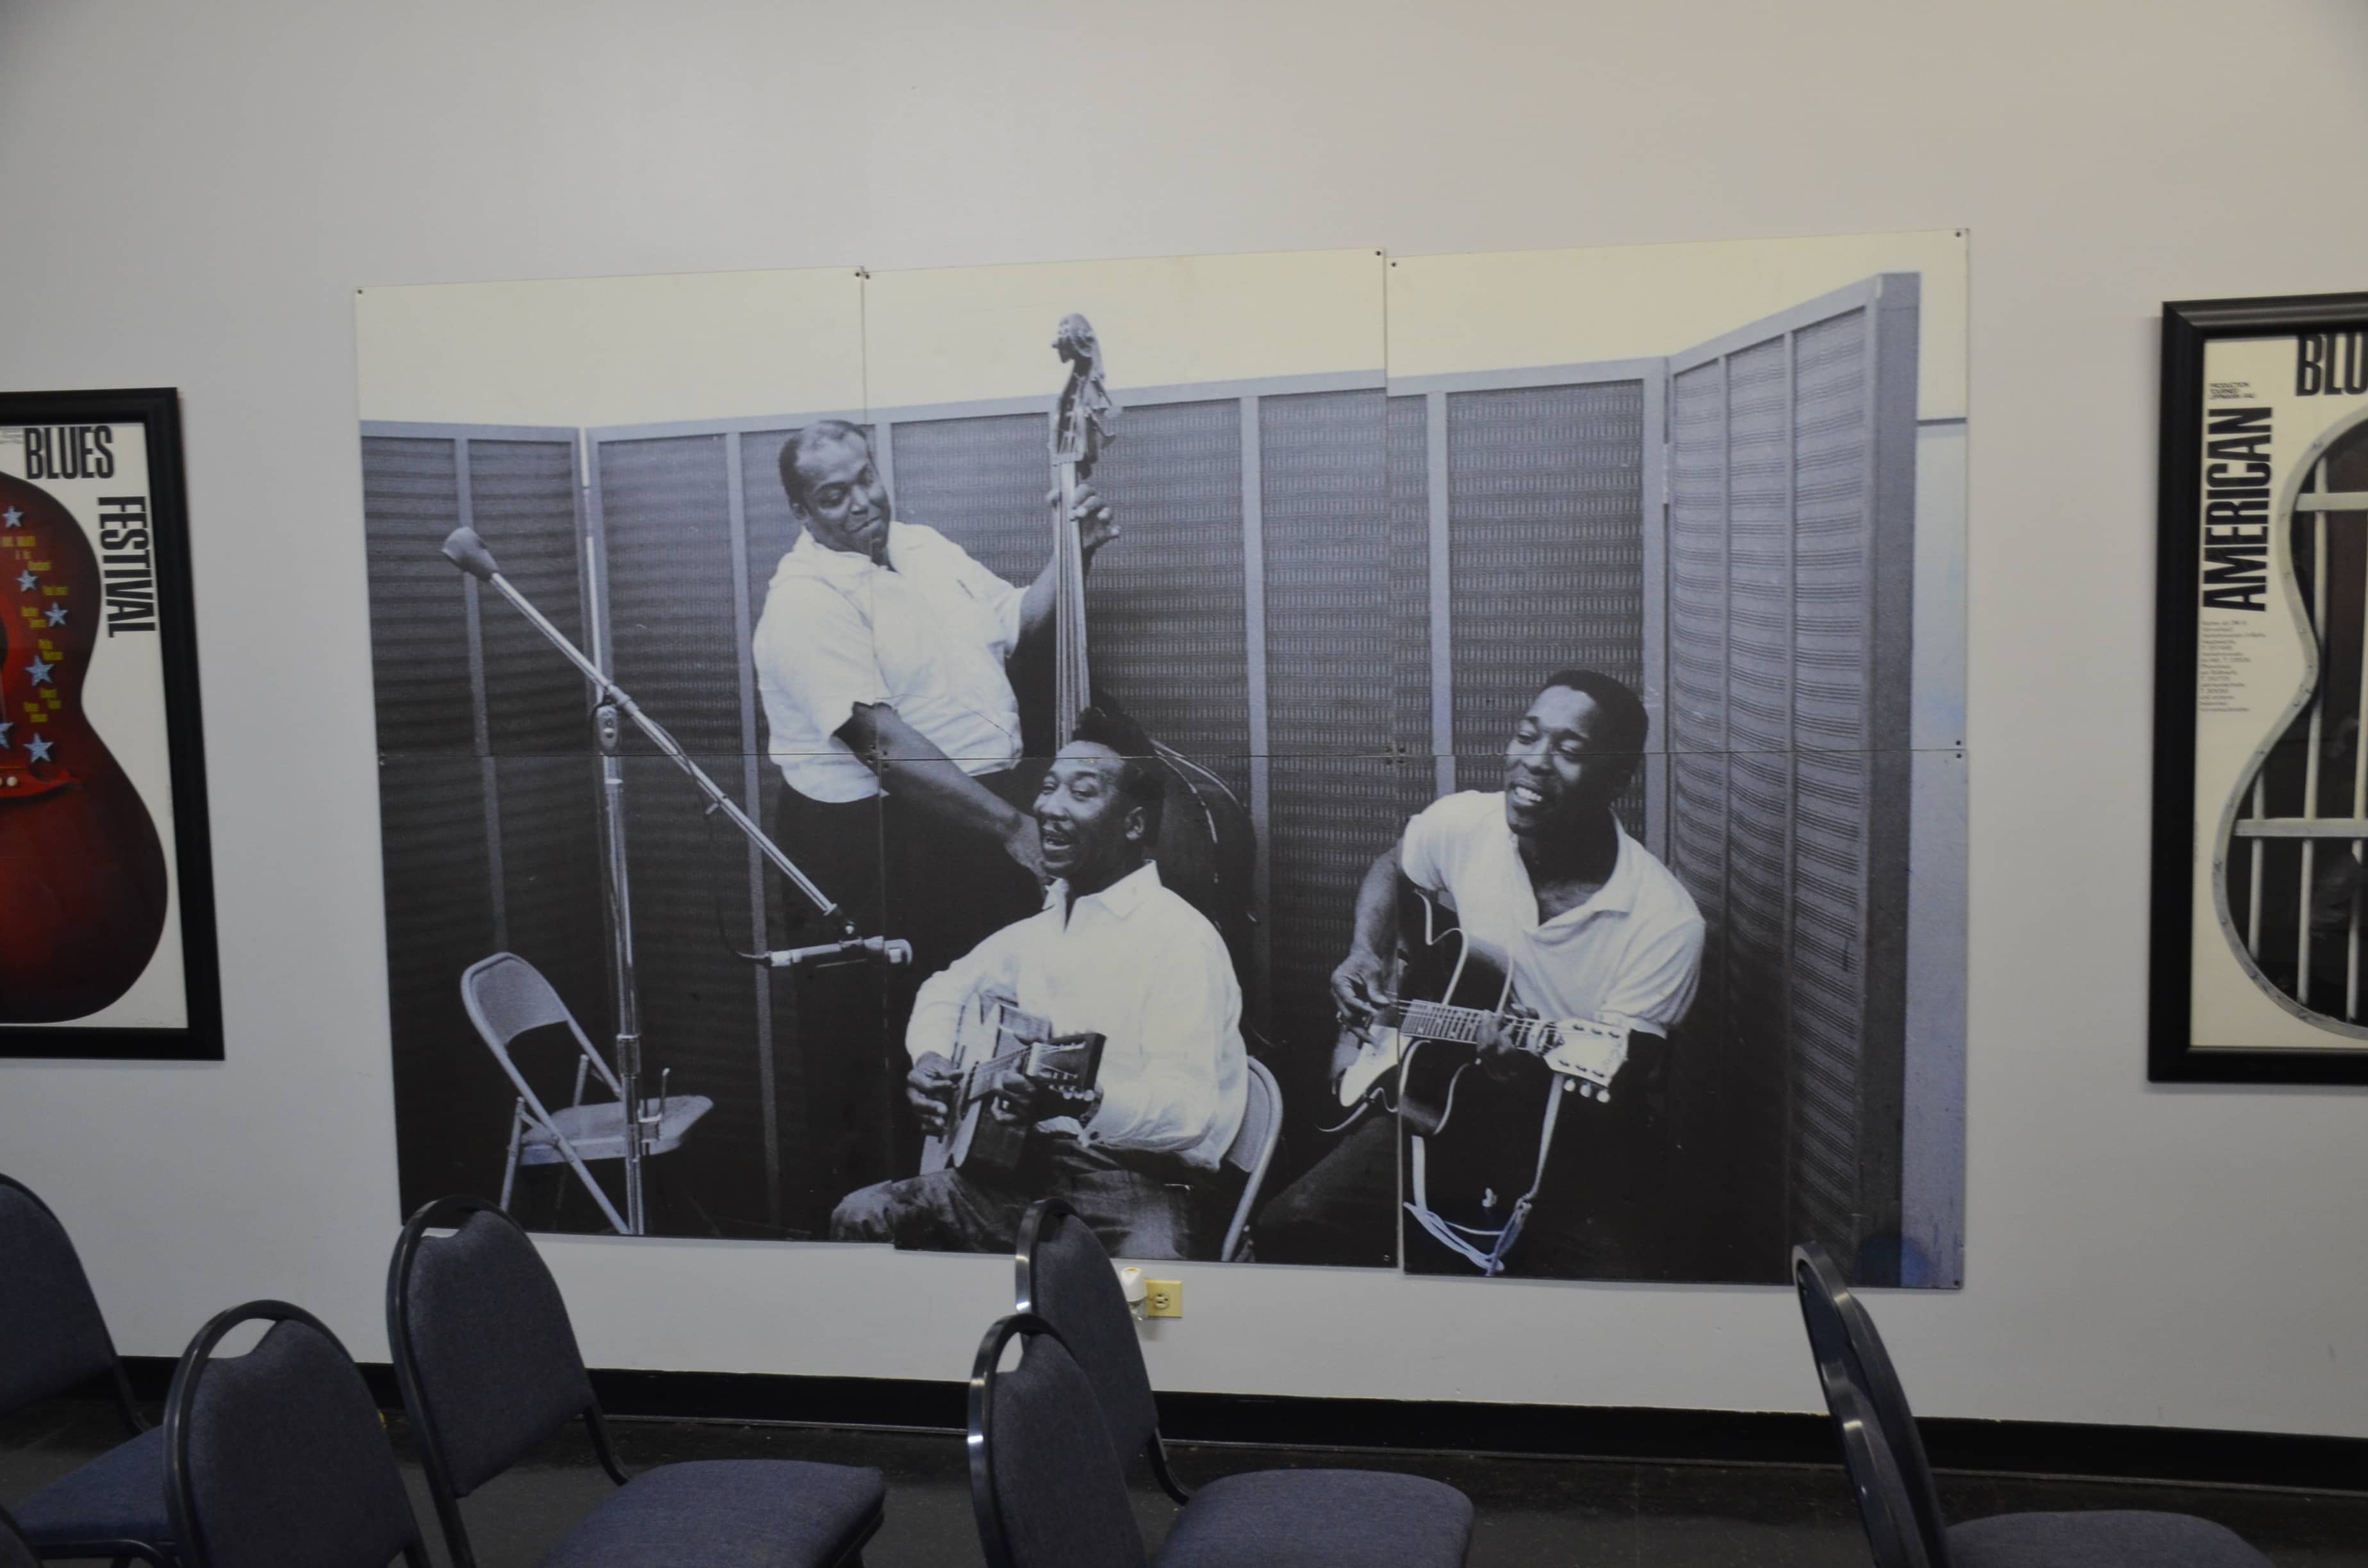 Photo in the studio at Chess Records building (Willie Dixon's Blues Heaven) in Chicago, Illinois